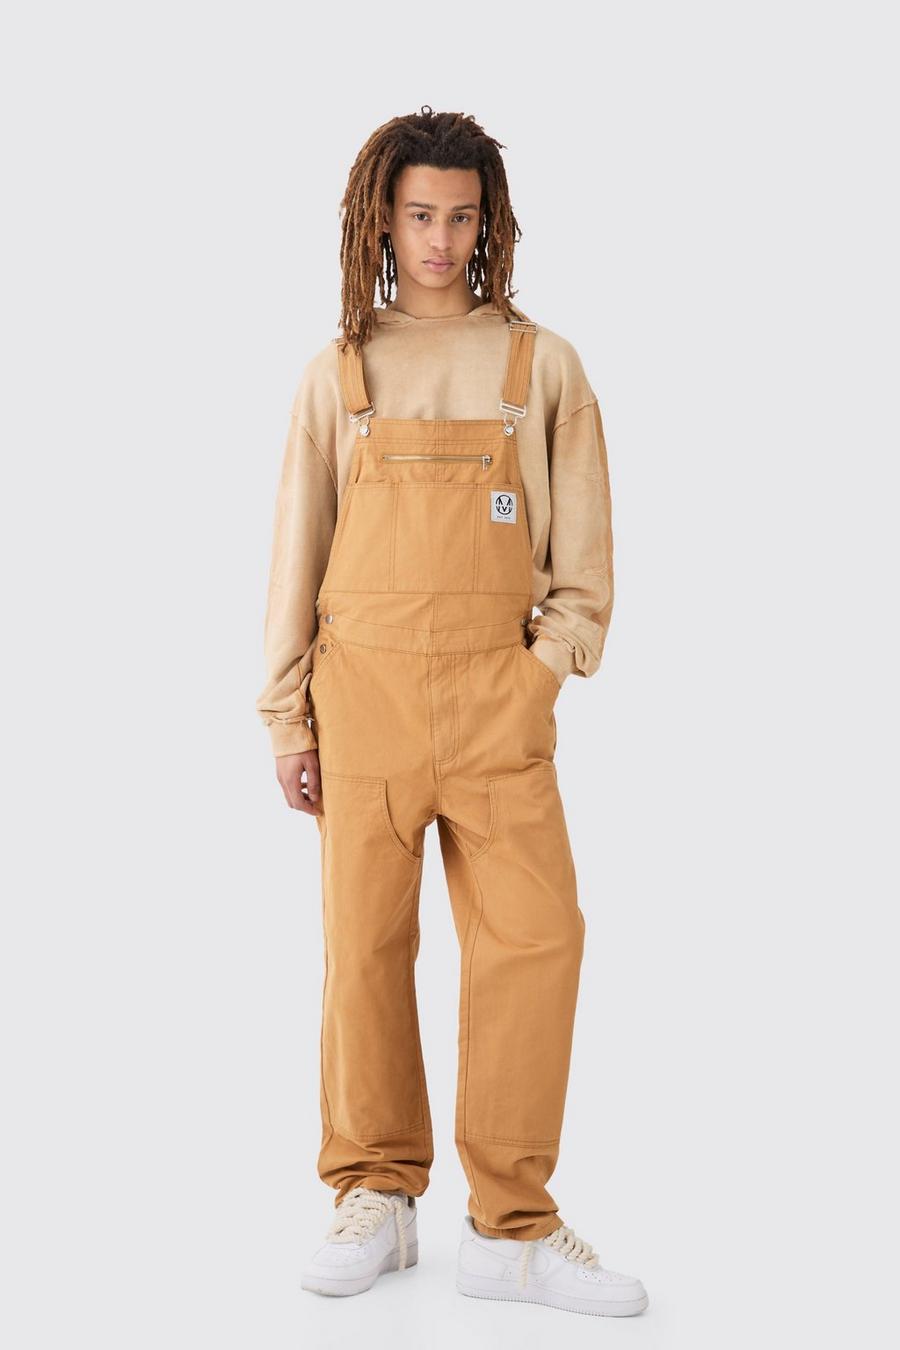 Tan Washed Twill Branded Zip Carpenter Relaxed Fit Dungarees